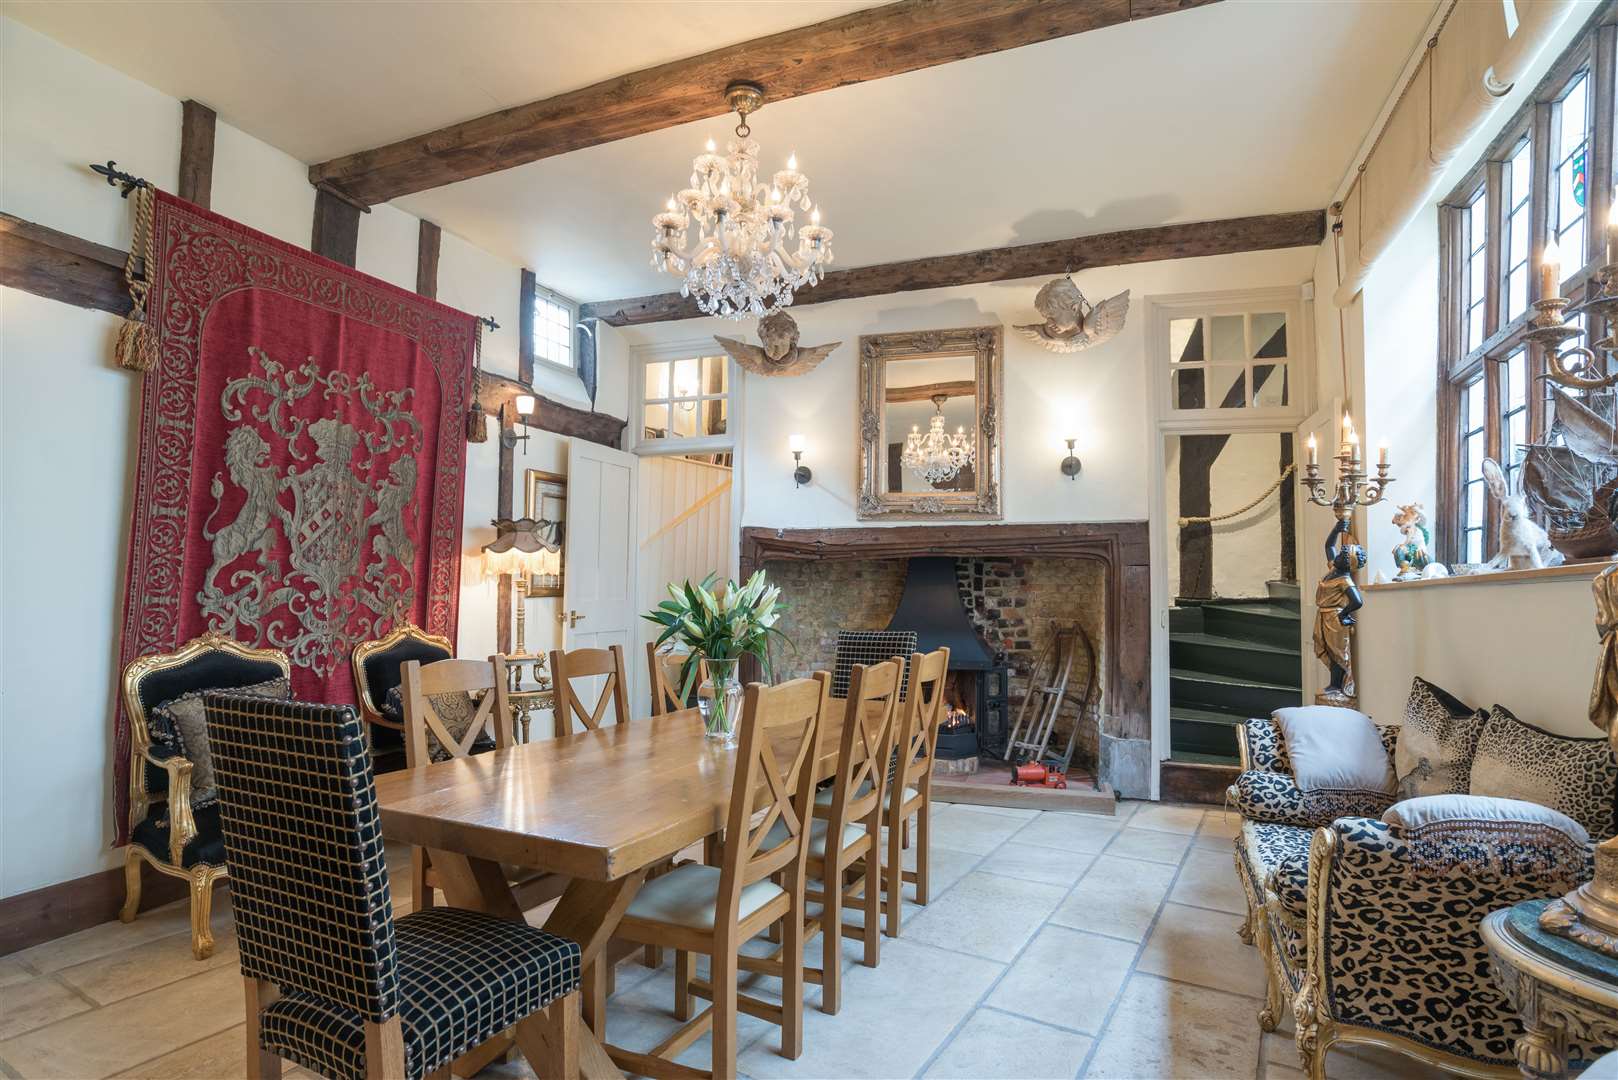 The current owners run the property as a B&B. Picture: Zoopla / Regal Estates